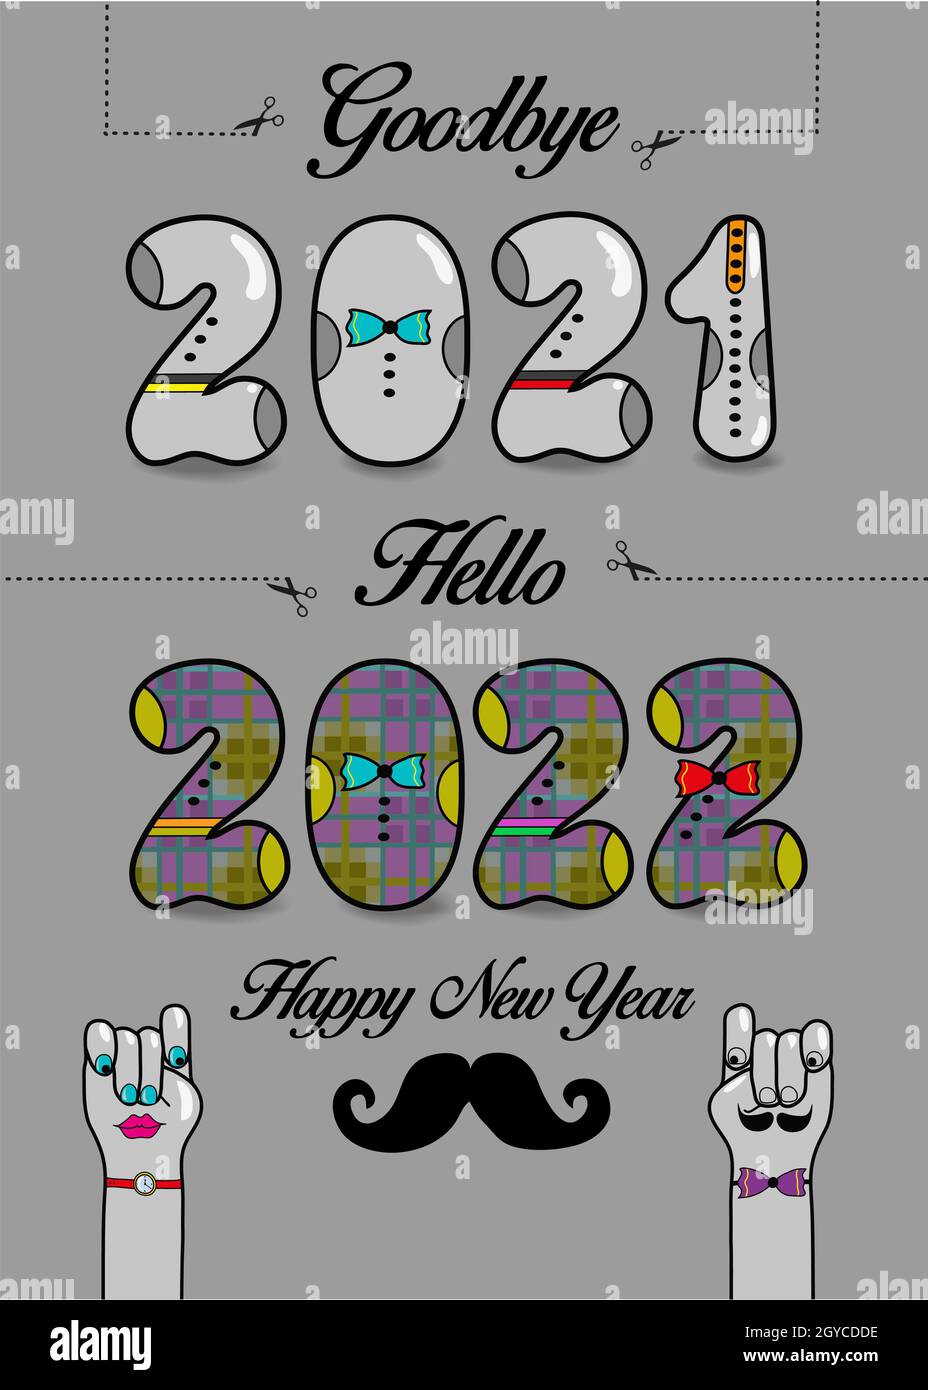 Goodbye 2021. Hello 2022. Happy New Year. Artistic numbers with ties and buttons, black texts and scissors. Cartoon male and female hands looking at e Stock Photo